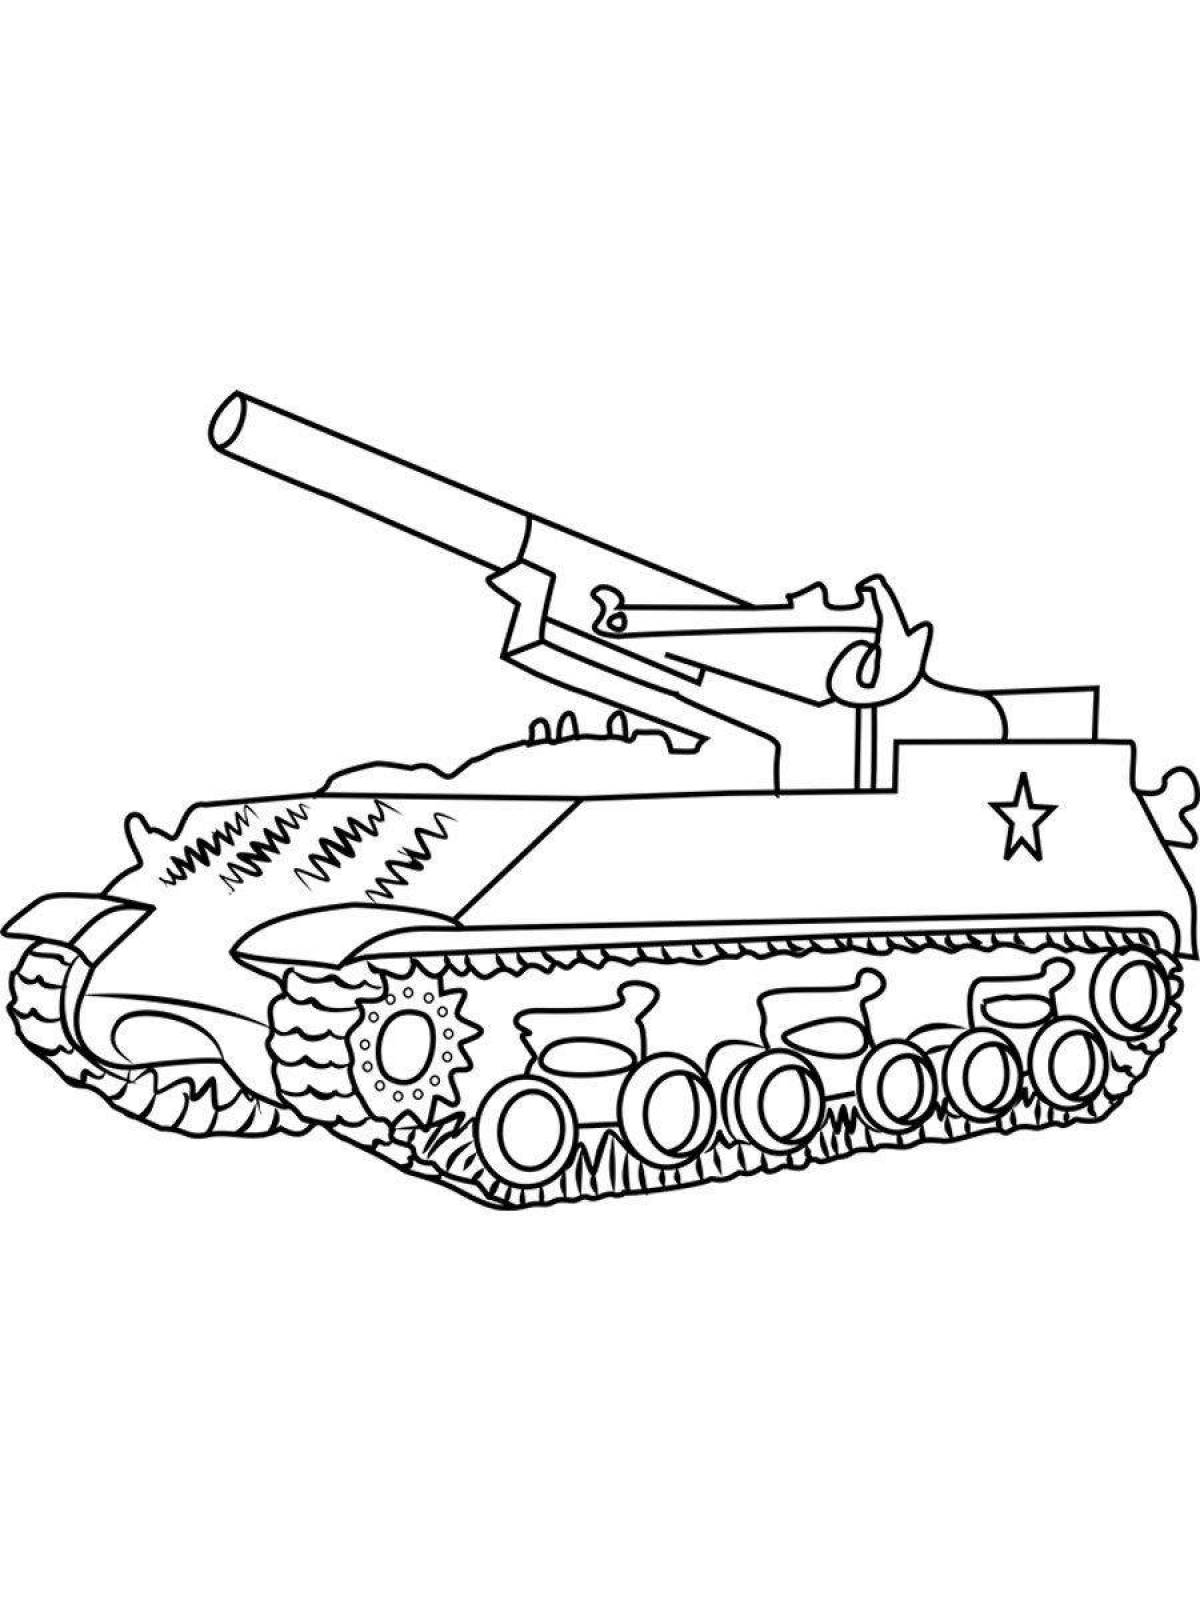 Adorable tank coloring book for 4-5 year olds